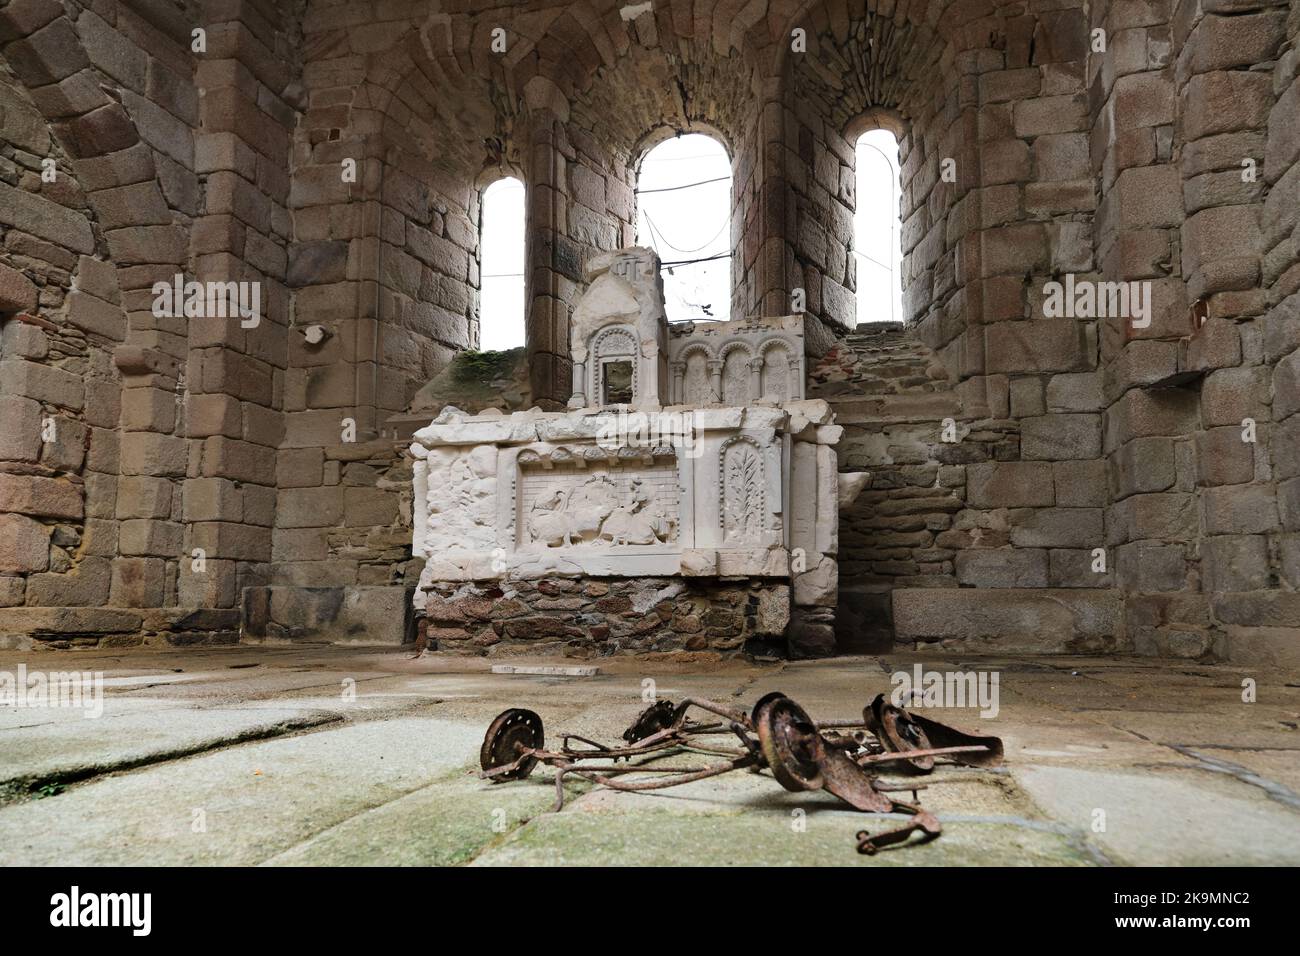 The Remains of a Childs Pram and the Bullet Scarred Alter Behind in the Church of Oradour-sur-Glane in the Haute-Vienne, France Stock Photo